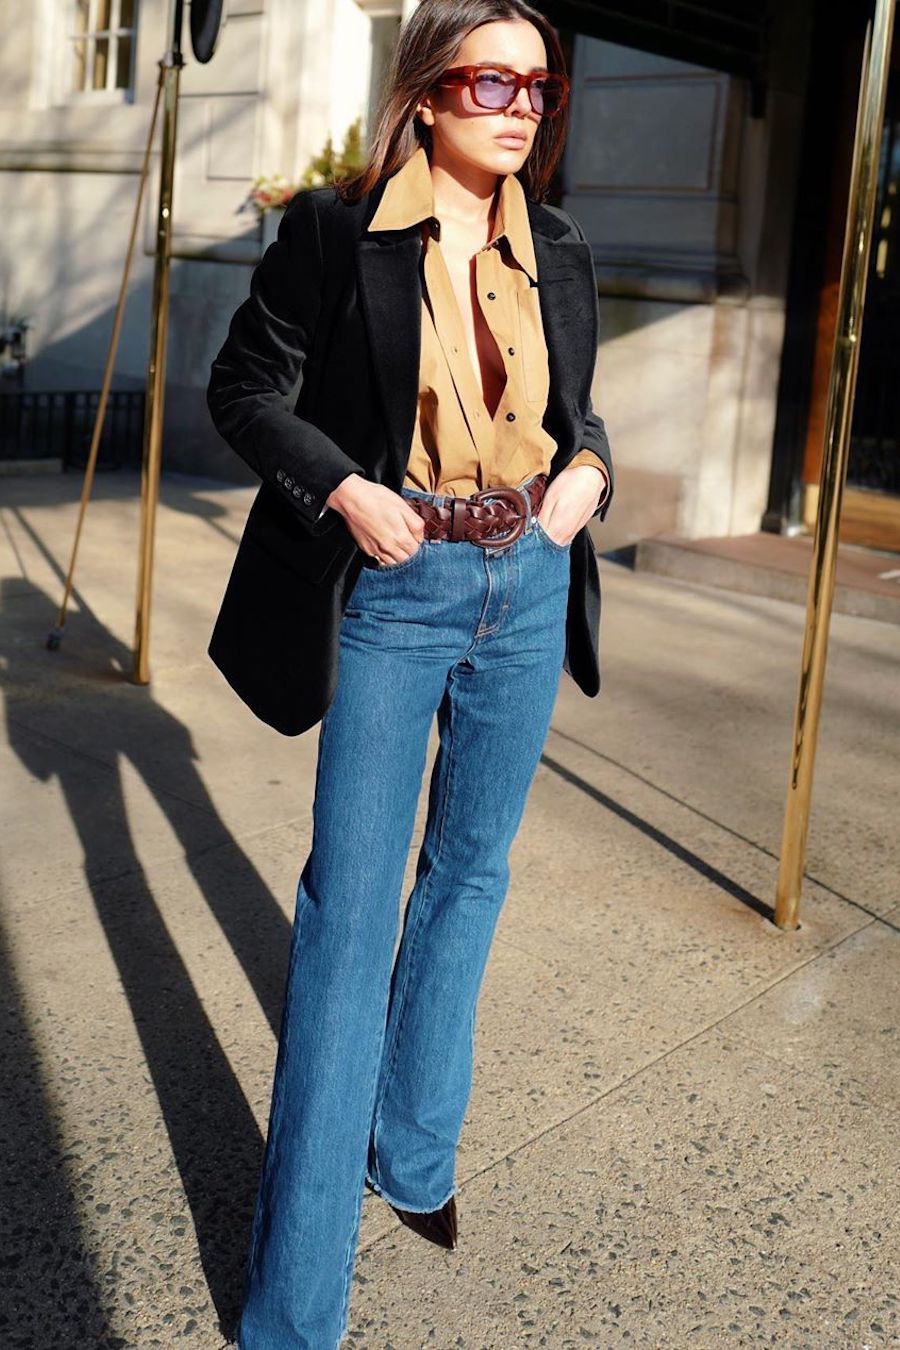 70s Inspired Jeans 0utfit - Outfitting Ideas